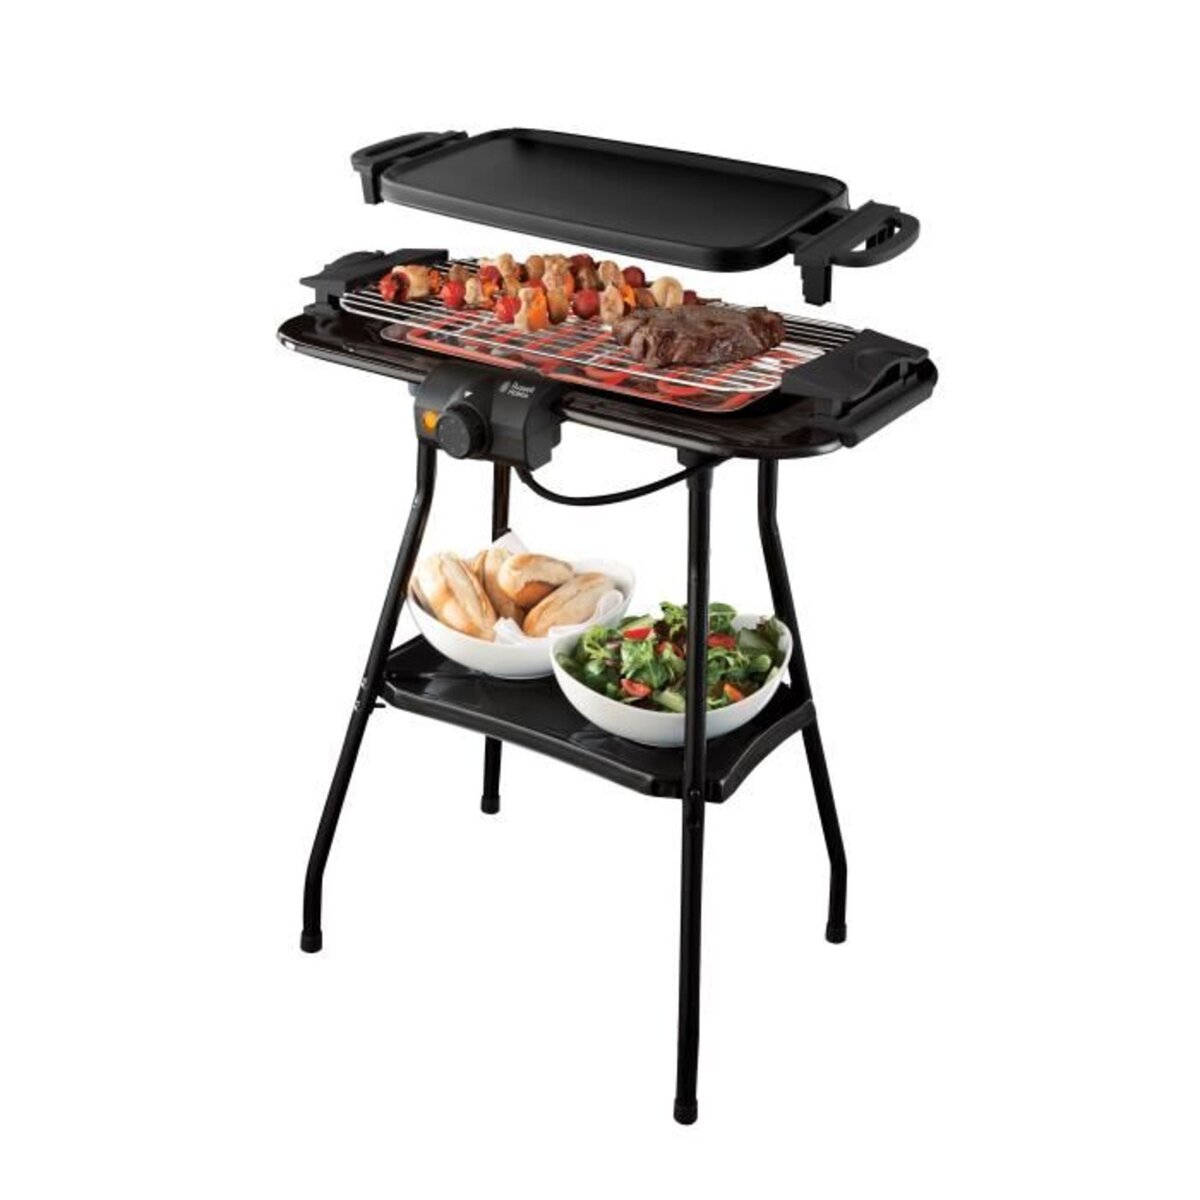 RUSSELL HOBBS Barbecue electrique 20950-56 Noir